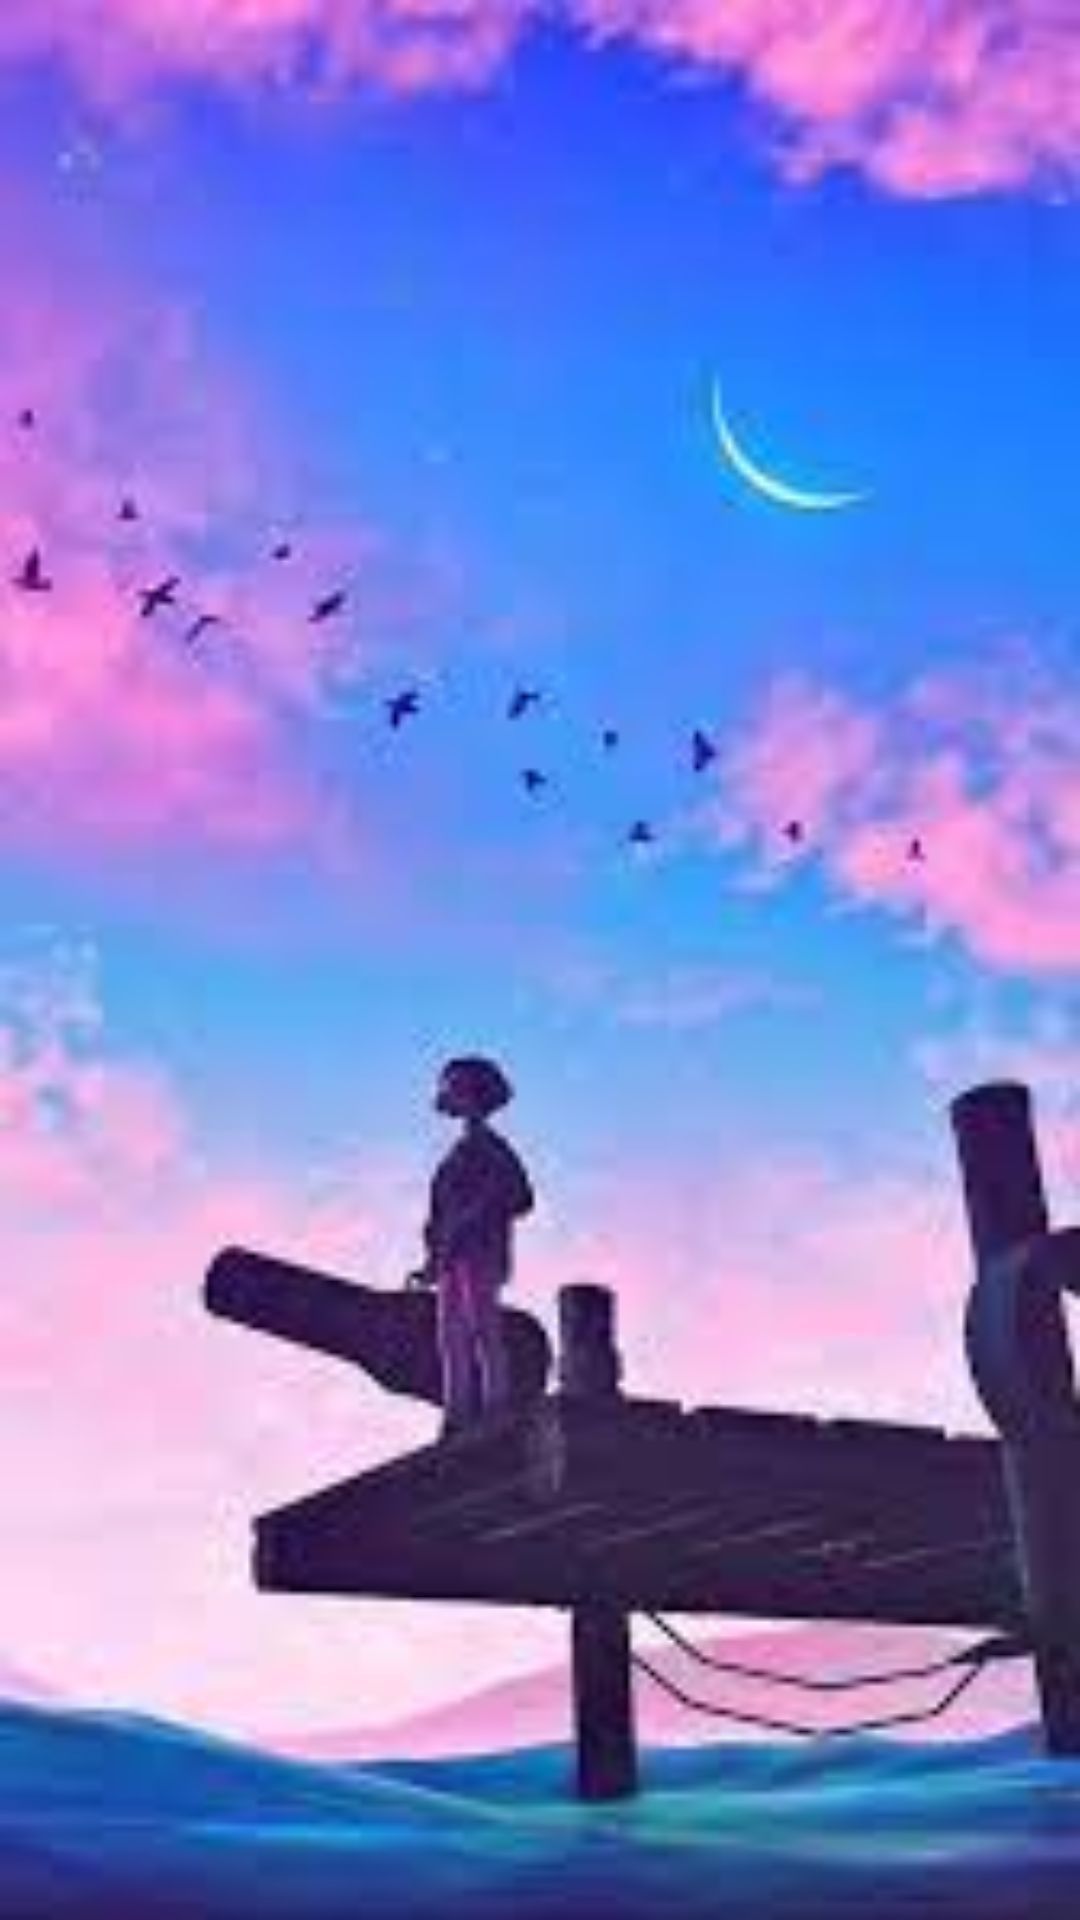 Anime boy standing on a dock - Anime, Android, anime landscape, blue anime